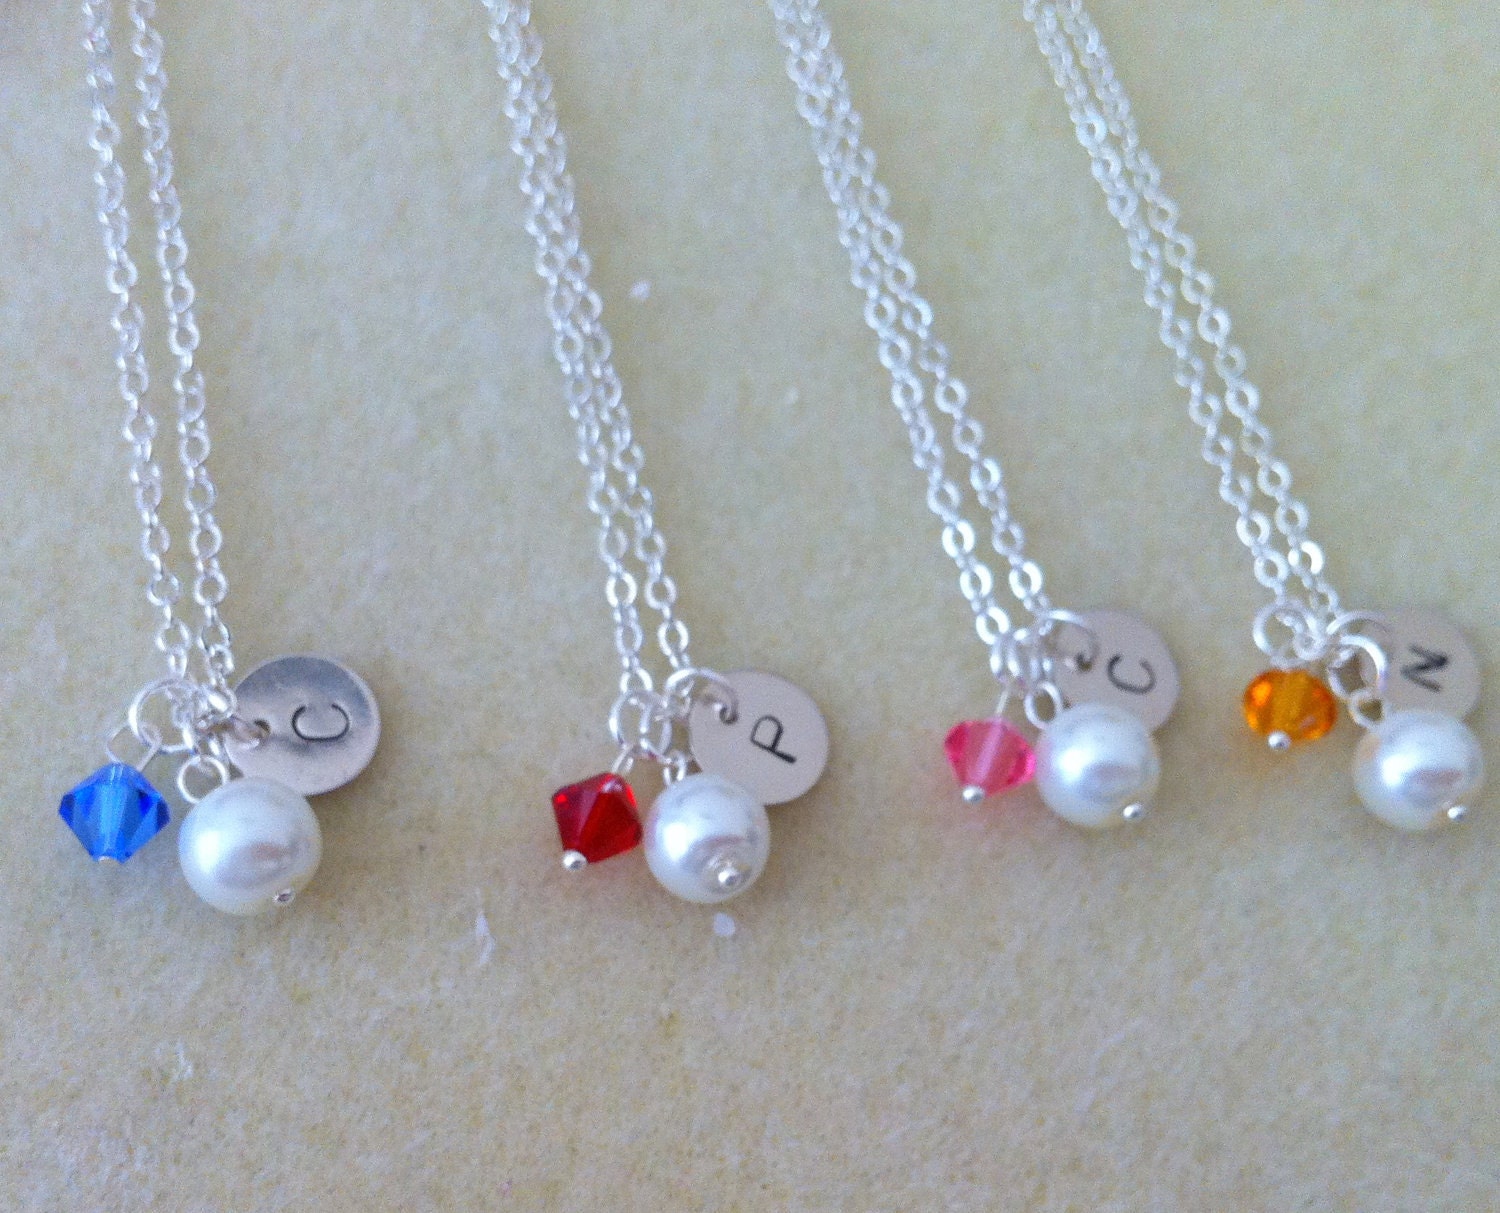 4 Bridesmaid necklace gifts, set of 4 necklaces, personalized, custom initials, pearl, birthstone, holiday, flowergirl, junior bride